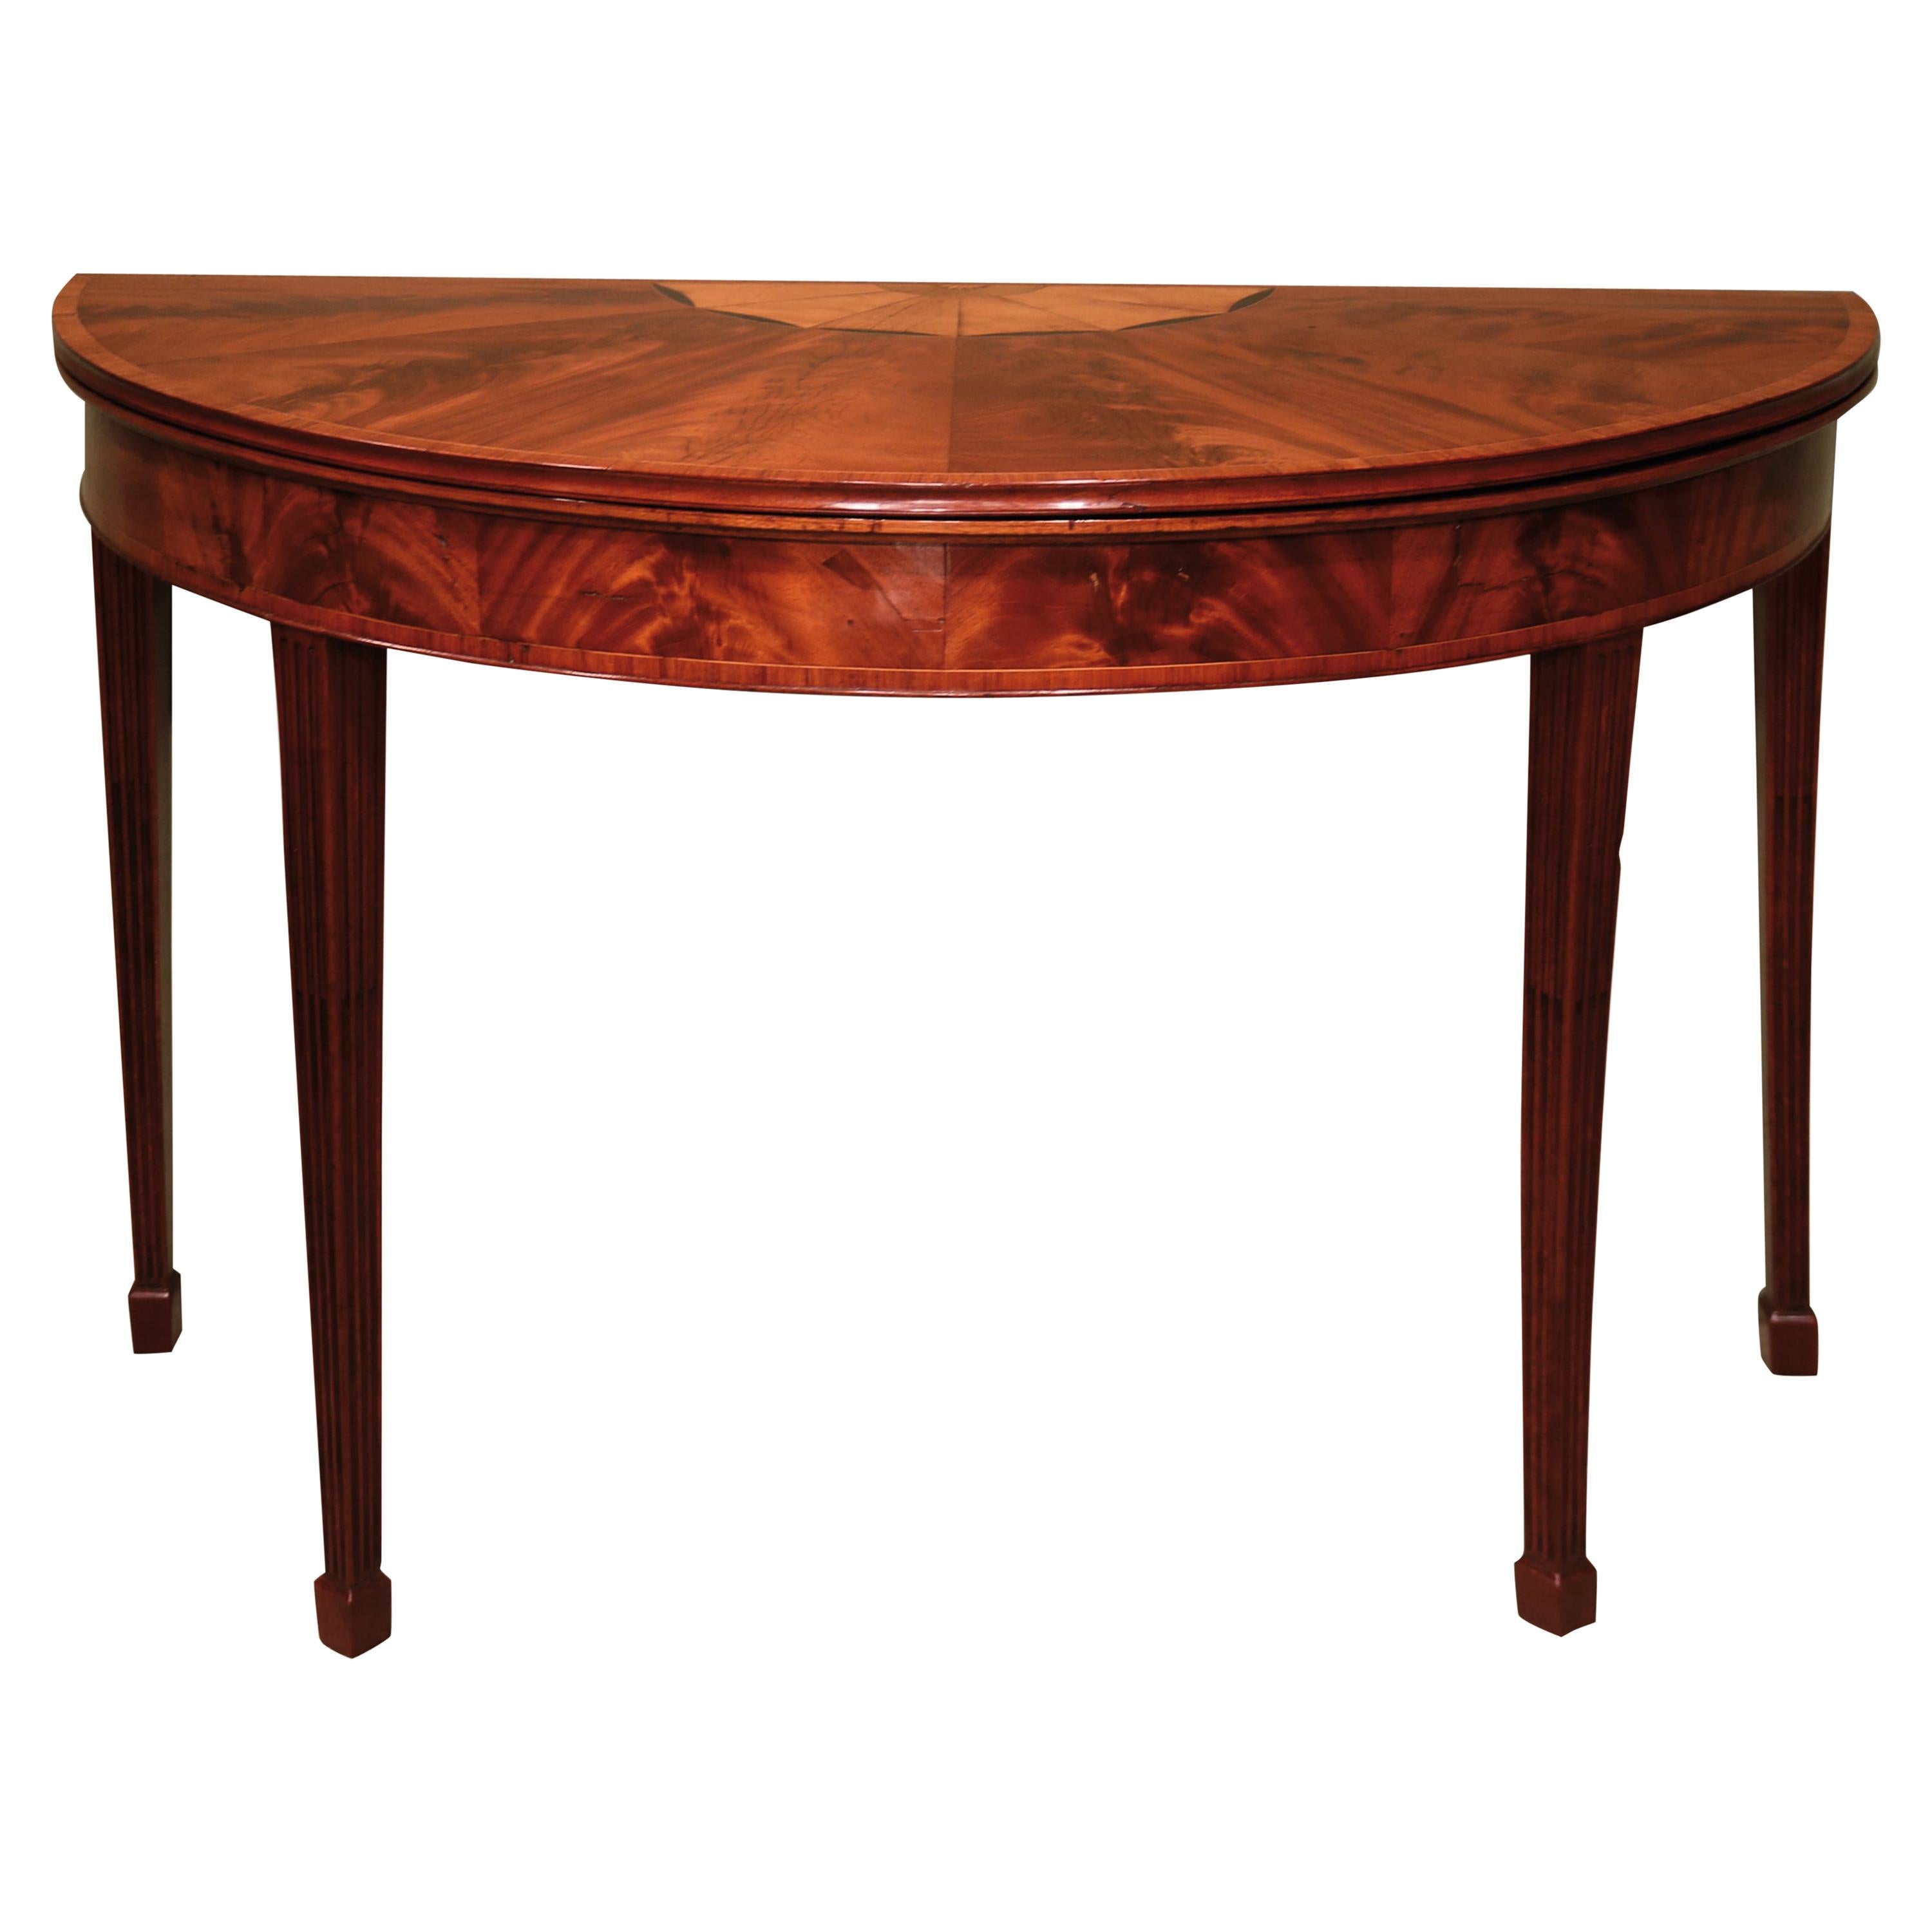 Late 18th Century Mahogany Card Table with a Segmented Top